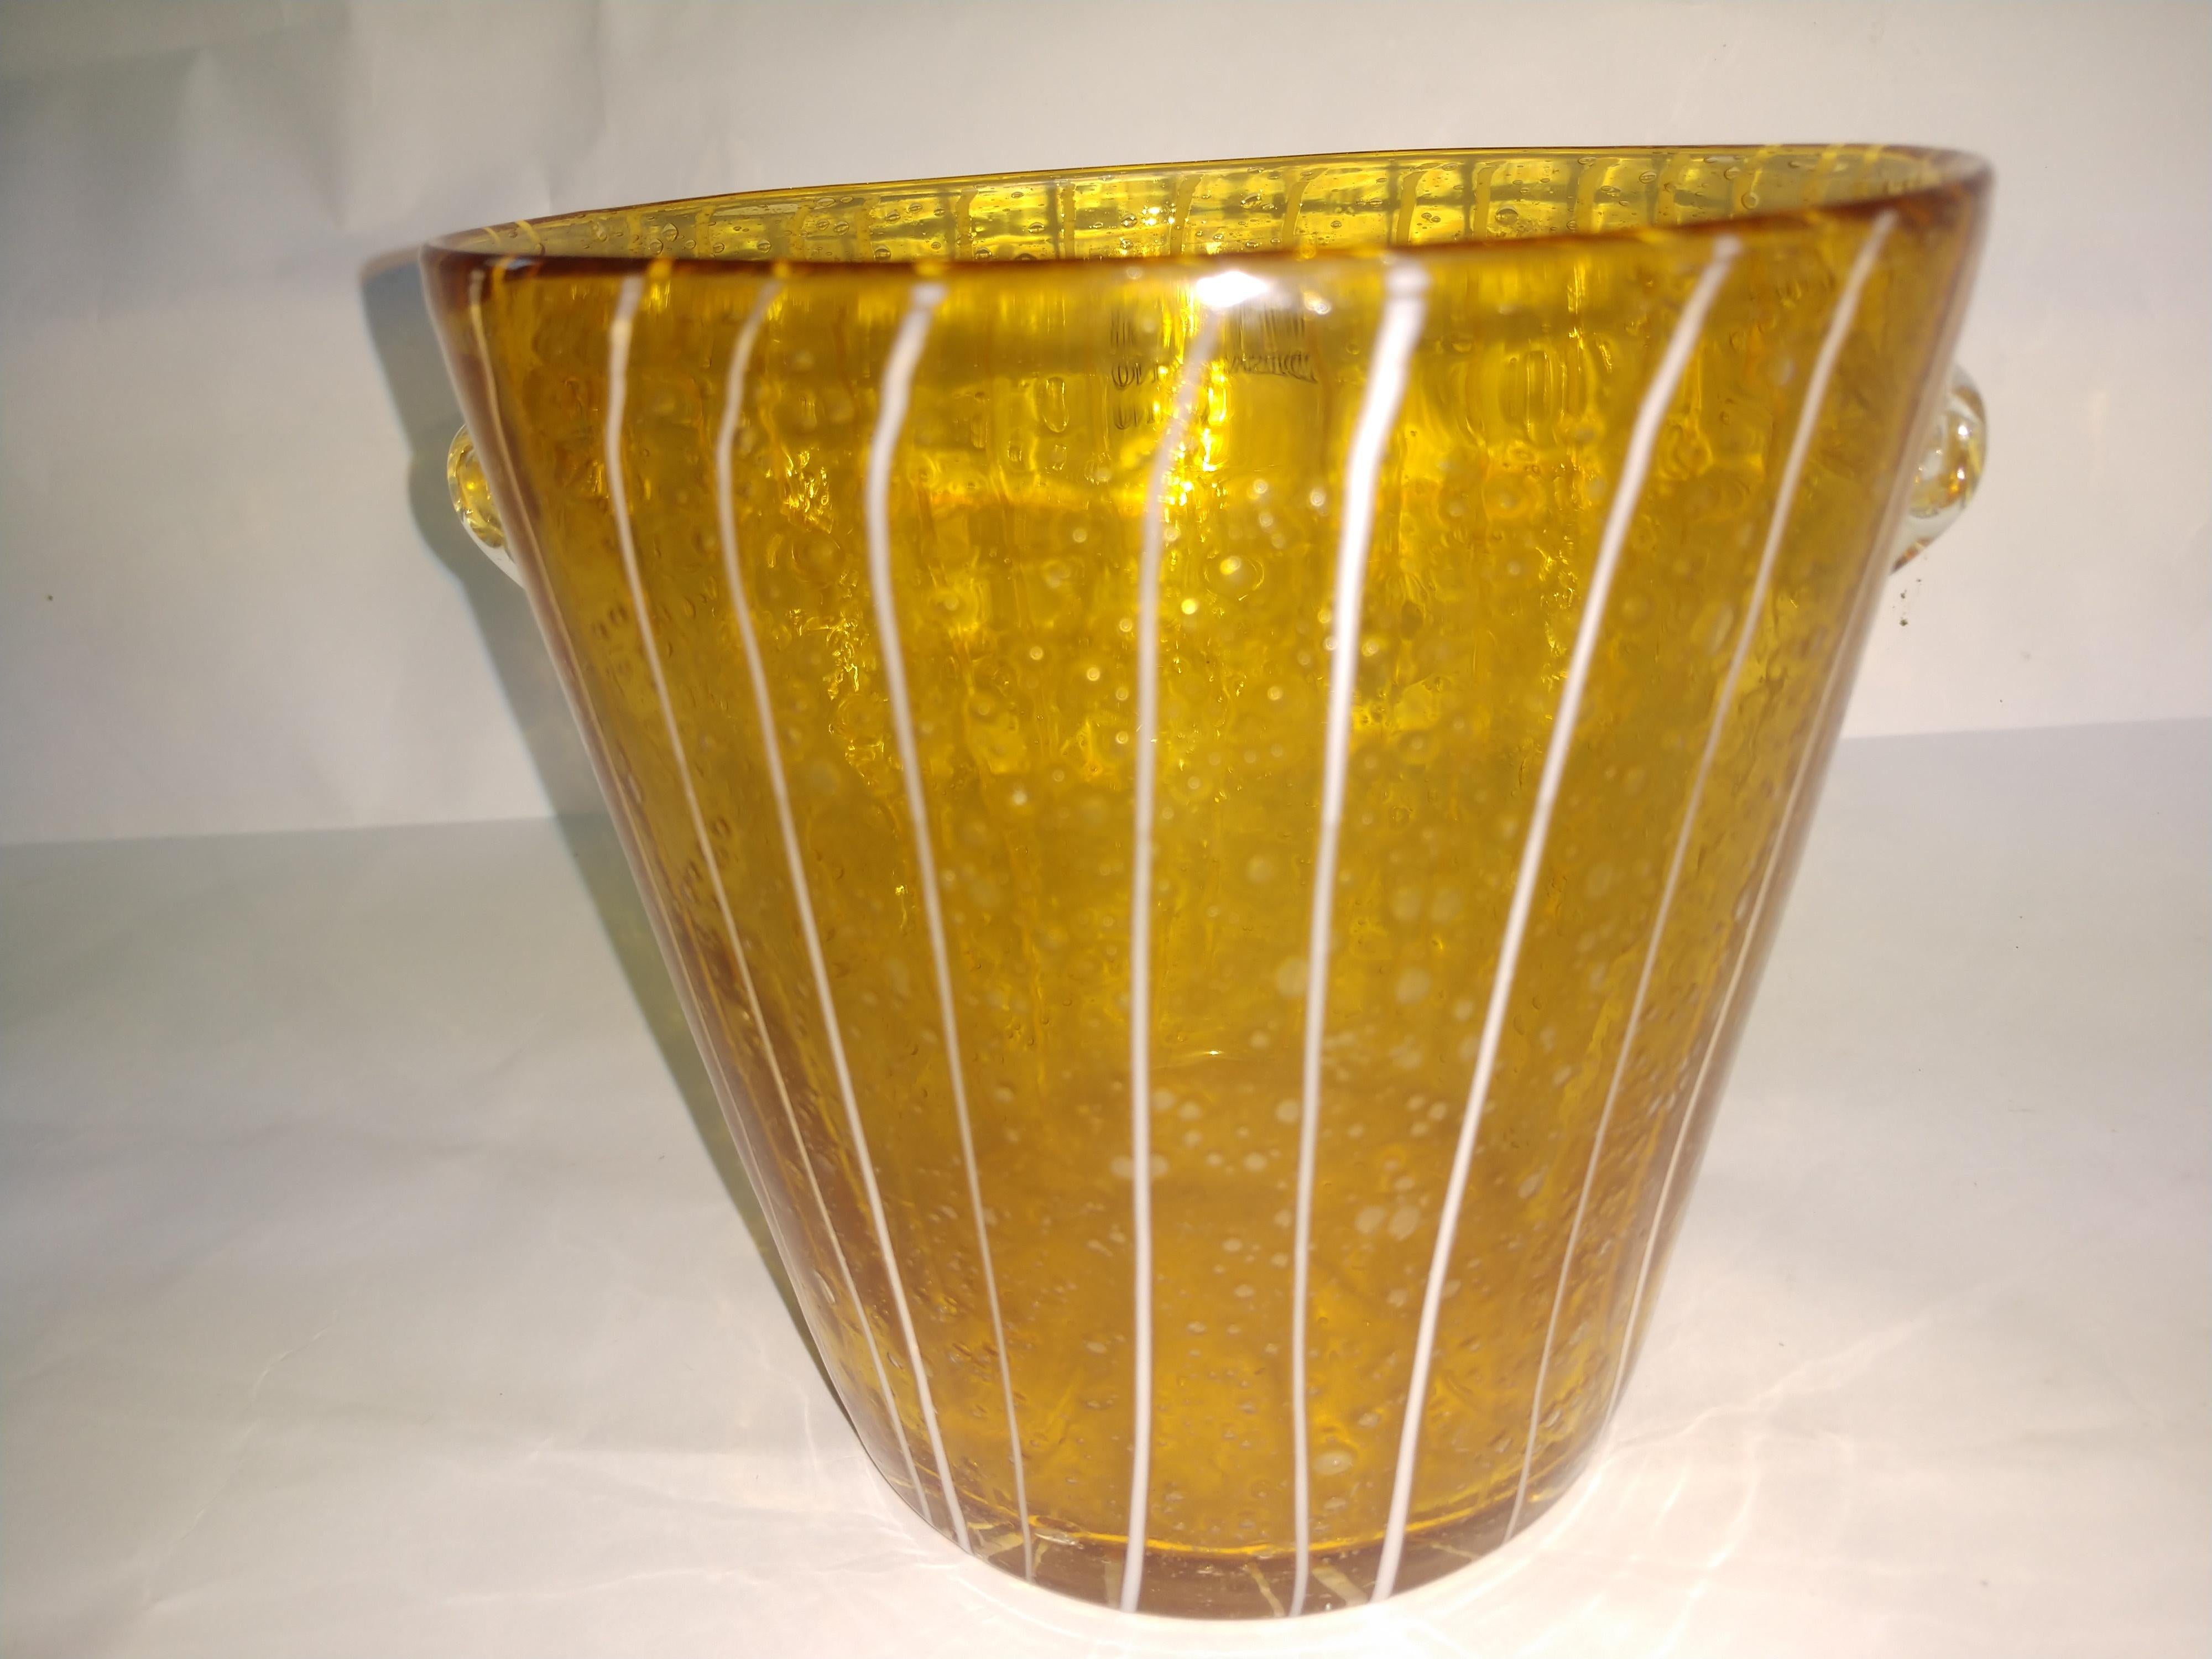 Striking art glass vase ice bucket by Venini for Disaronno. Beautiful amber glass with a white striped drizzle.